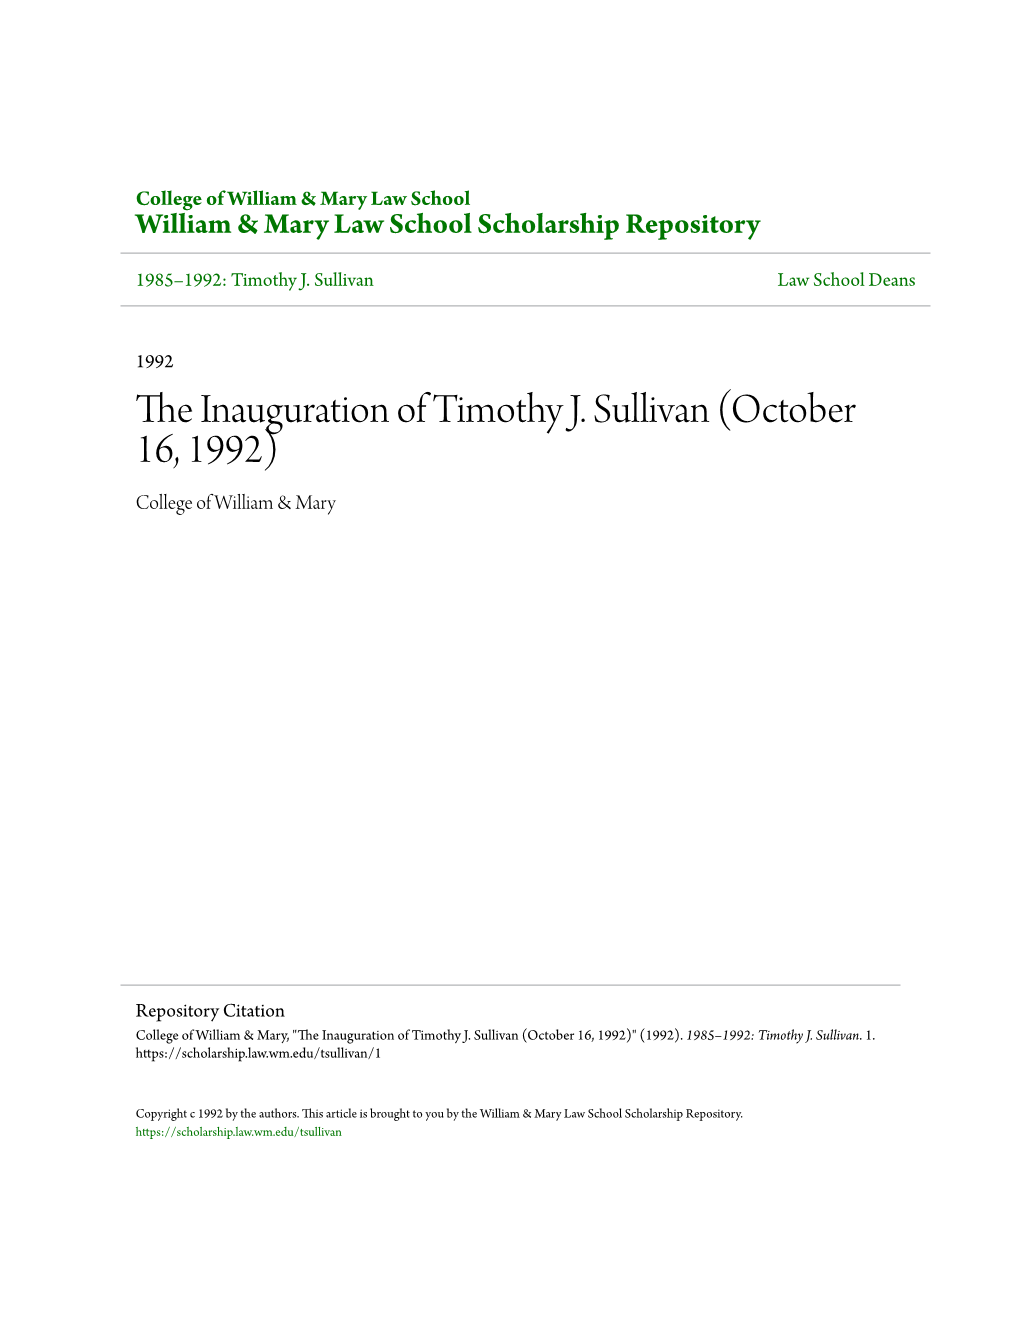 The Inauguration of Timothy J. Sullivan (October 16, 1992)